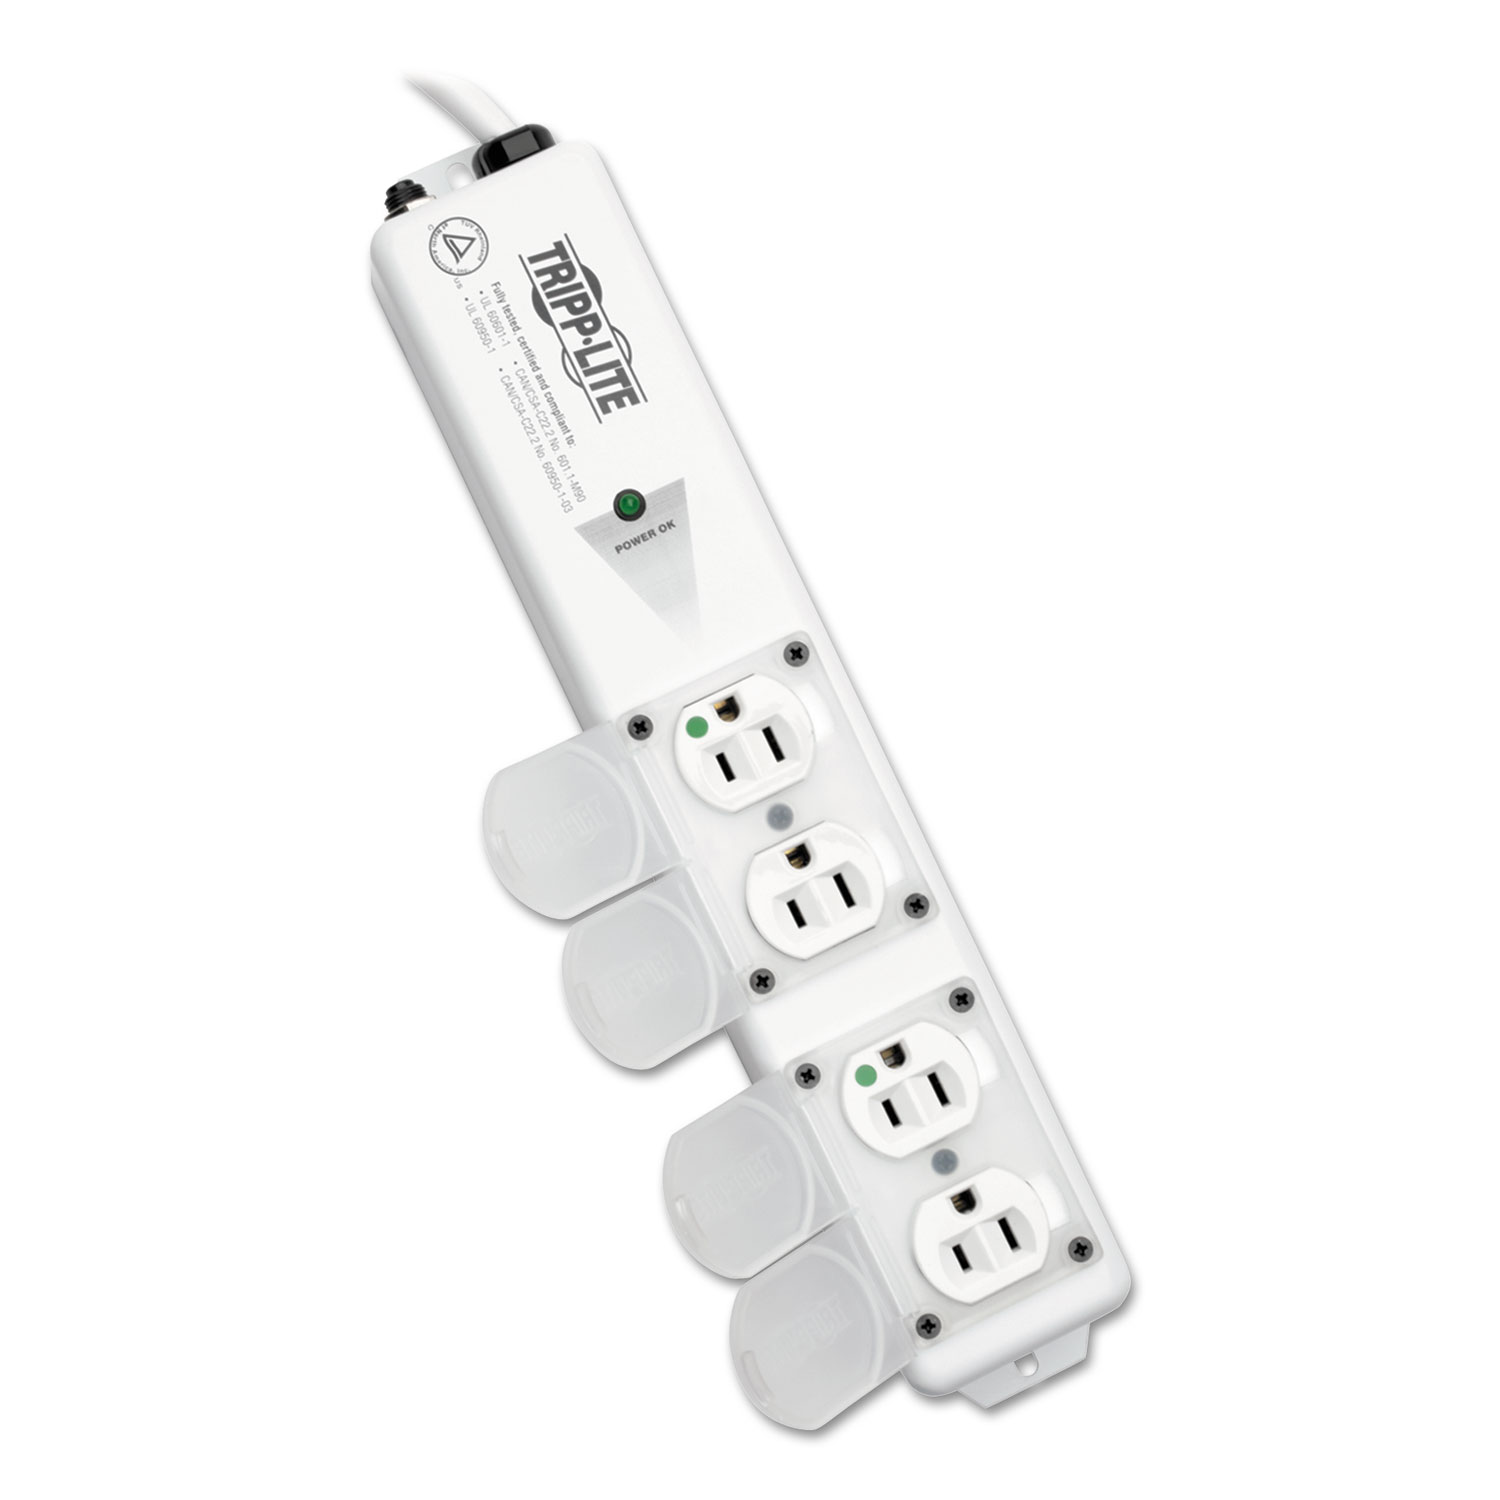  Tripp Lite PS-406-HGULTRA Medical-Grade Power Strip for Patient-Care Vicinity, 4 Outlets, 6 ft. Cord (TRPPS406HGULTRA) 